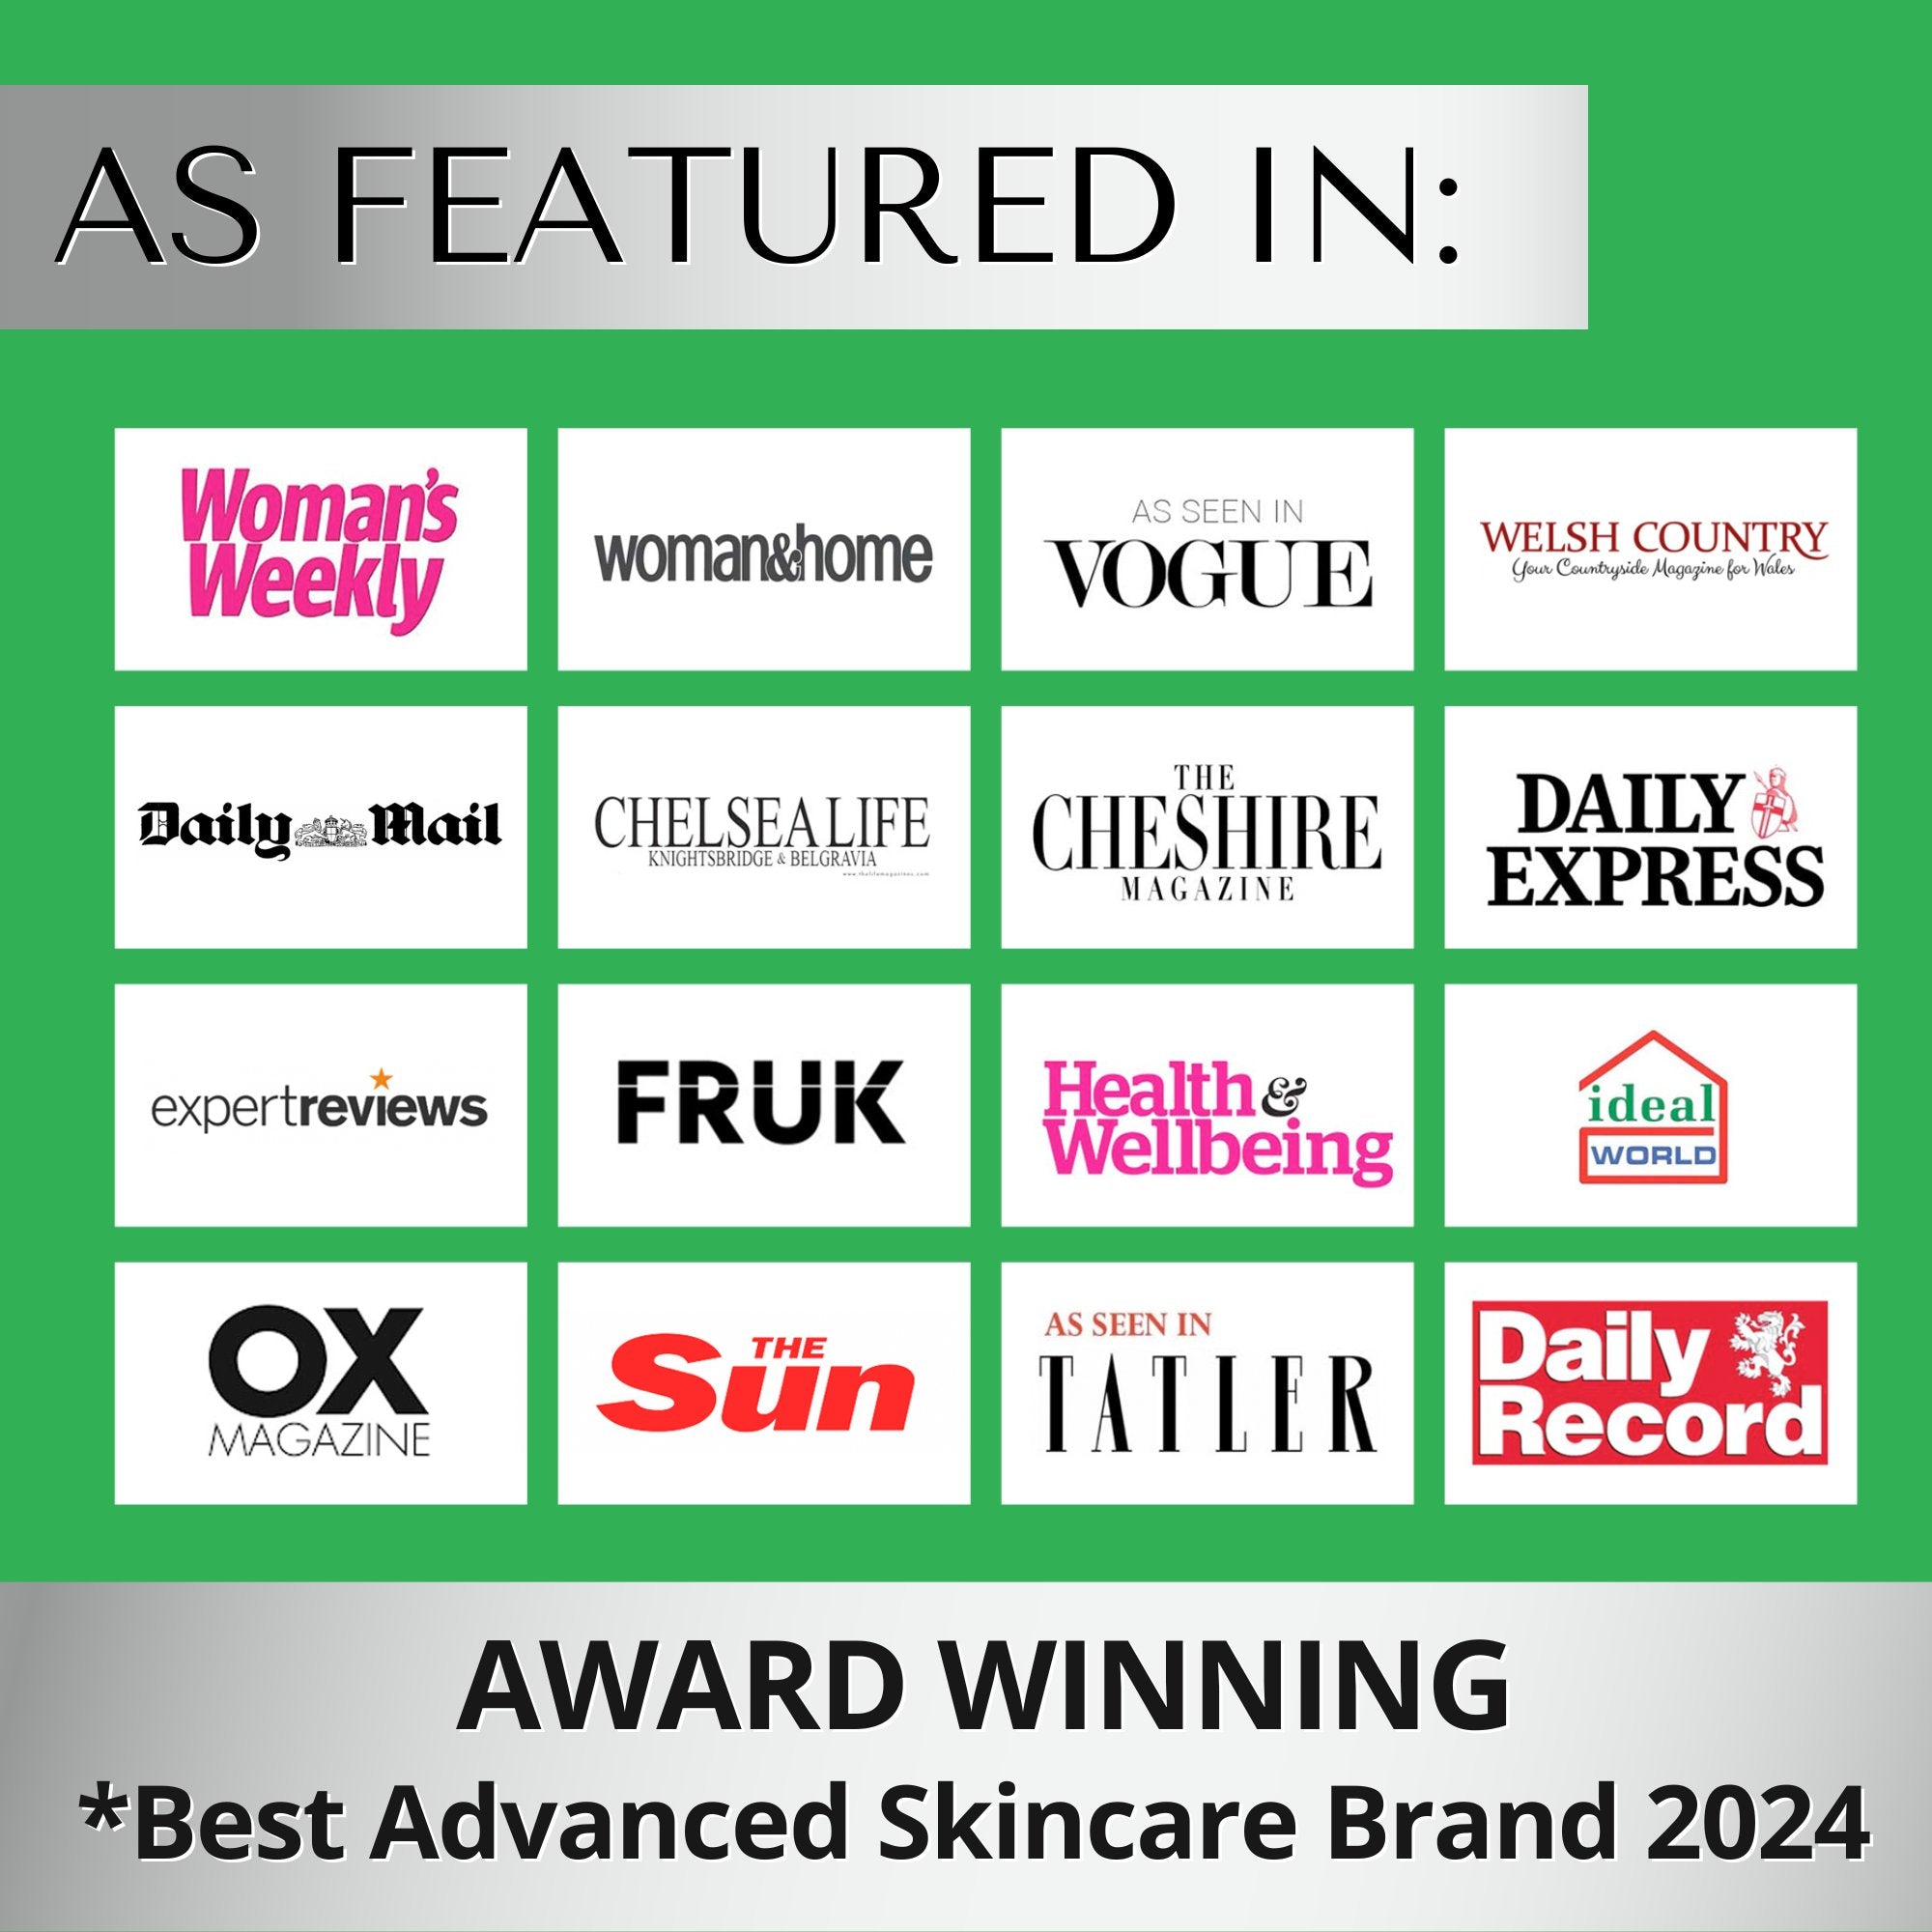 Dermaworks, the award winning skincare brand of 2024, as featured in leading publications, Vogue, Tatler and Ox magazine.